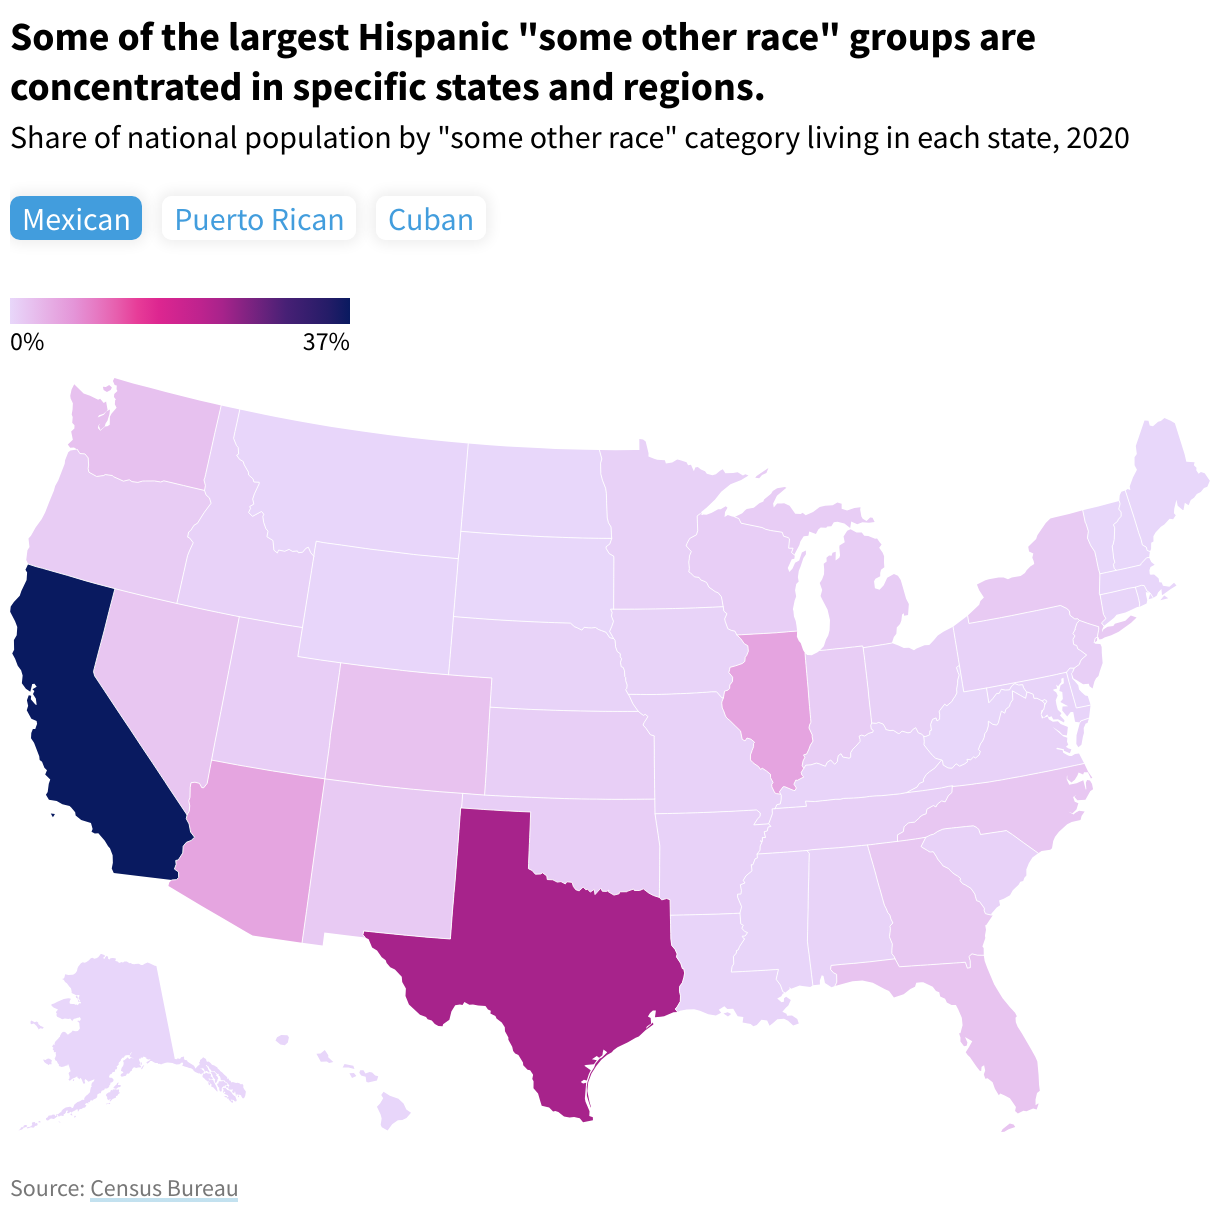 A US map which states colored by the percentages of "some other race" subcategories living in that state. Map can be toggled to show Mexican, Puerto Rican, or Cuban subcategory